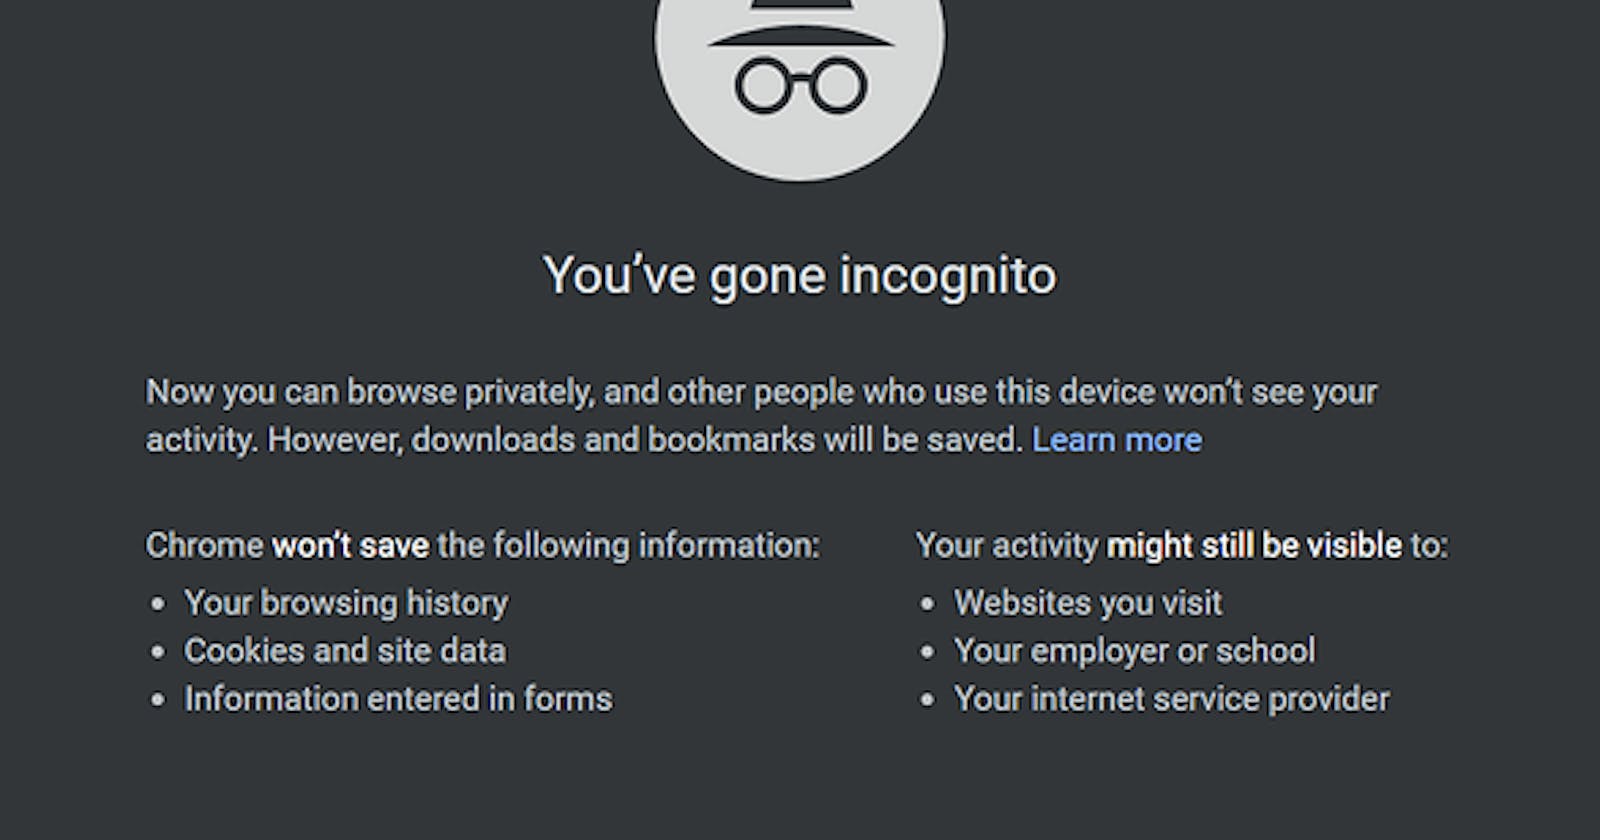 How to make Chrome always run in incognito mode